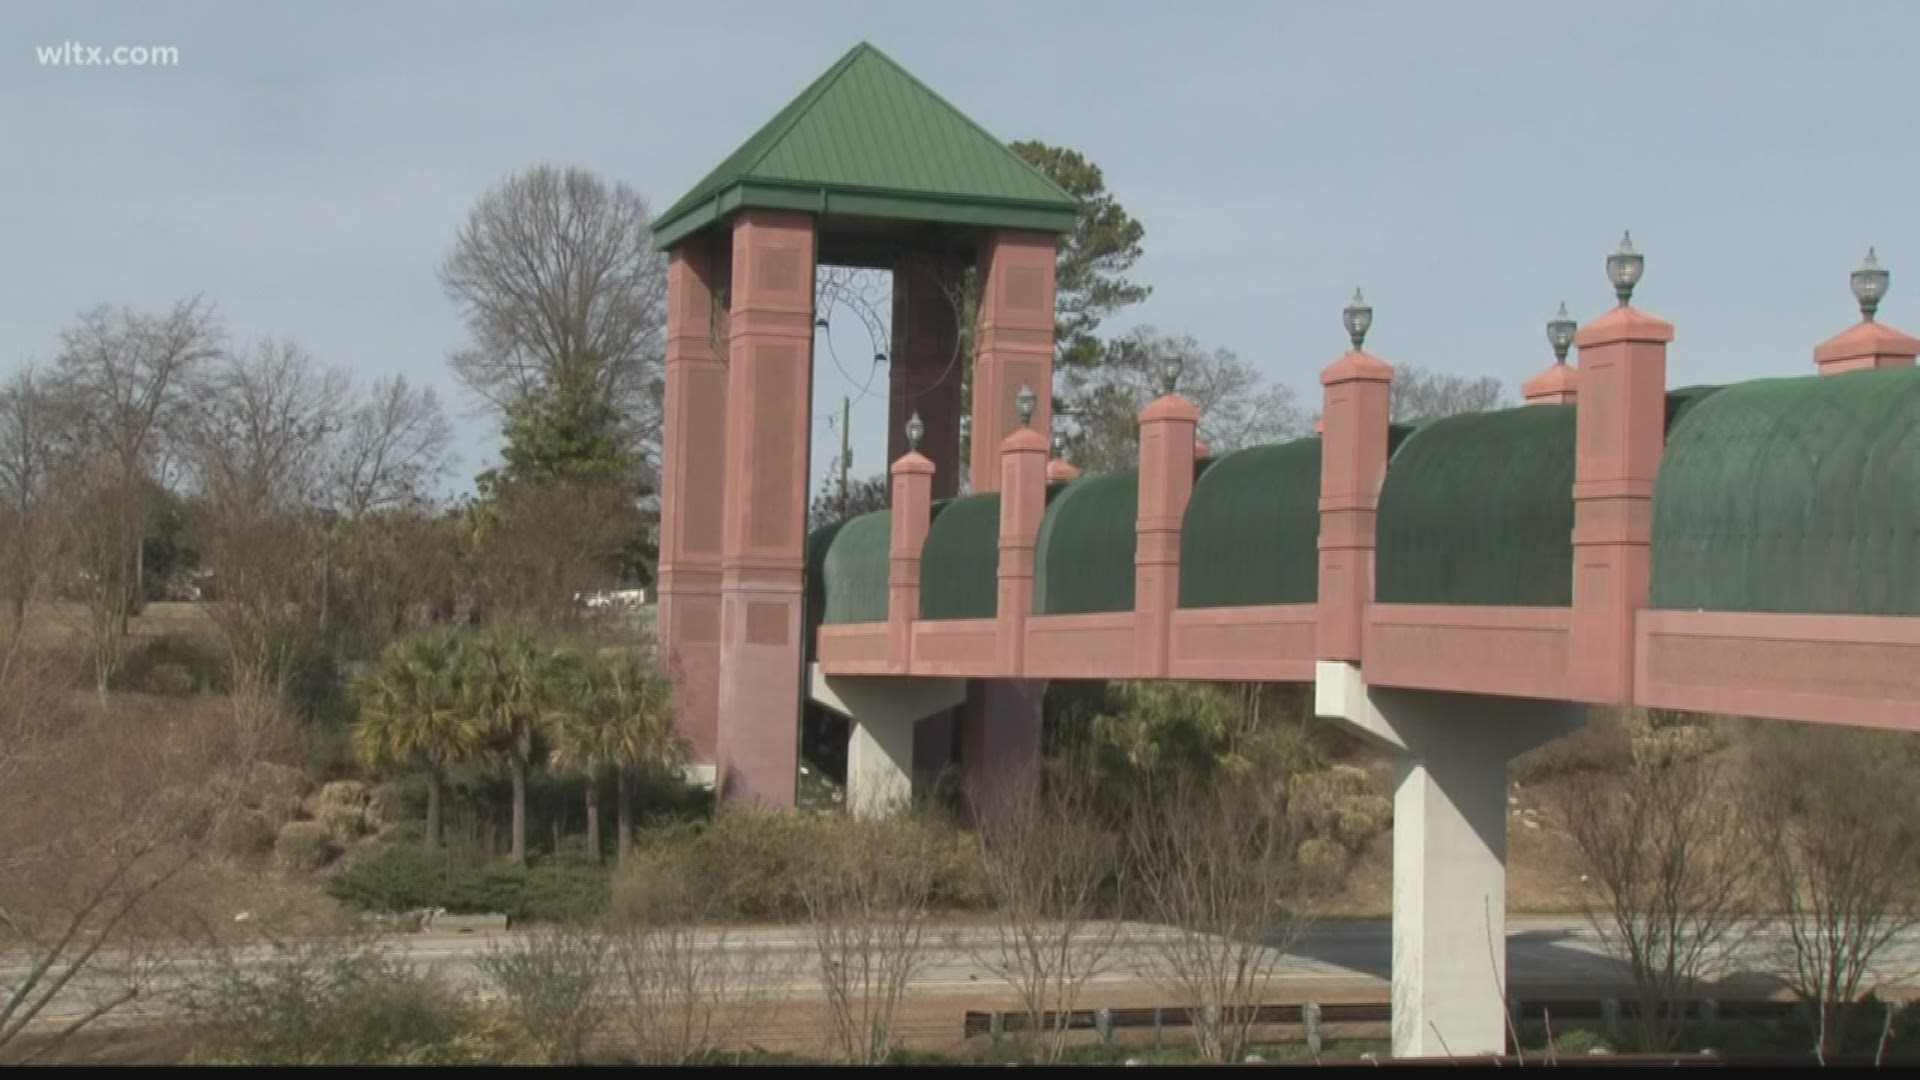 A plan is now in place to evaluate the James Clyburn Pedestrian Bridge after residents expressed concerns about safely crossing the walkway at night.